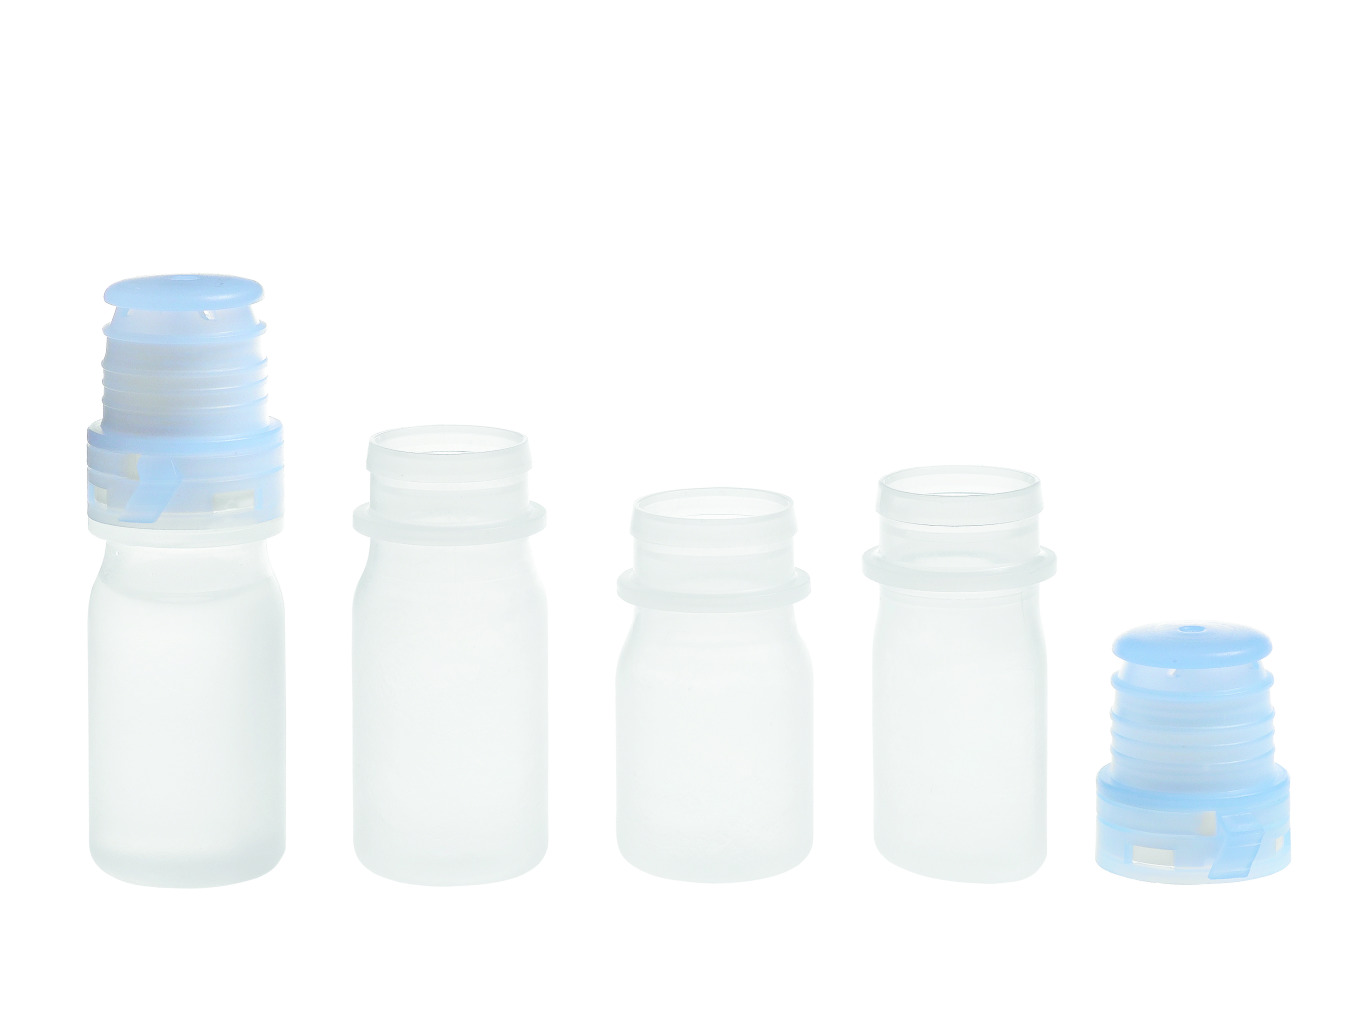 Ophthalmic Squeeze Dispenser (OSD) bottles